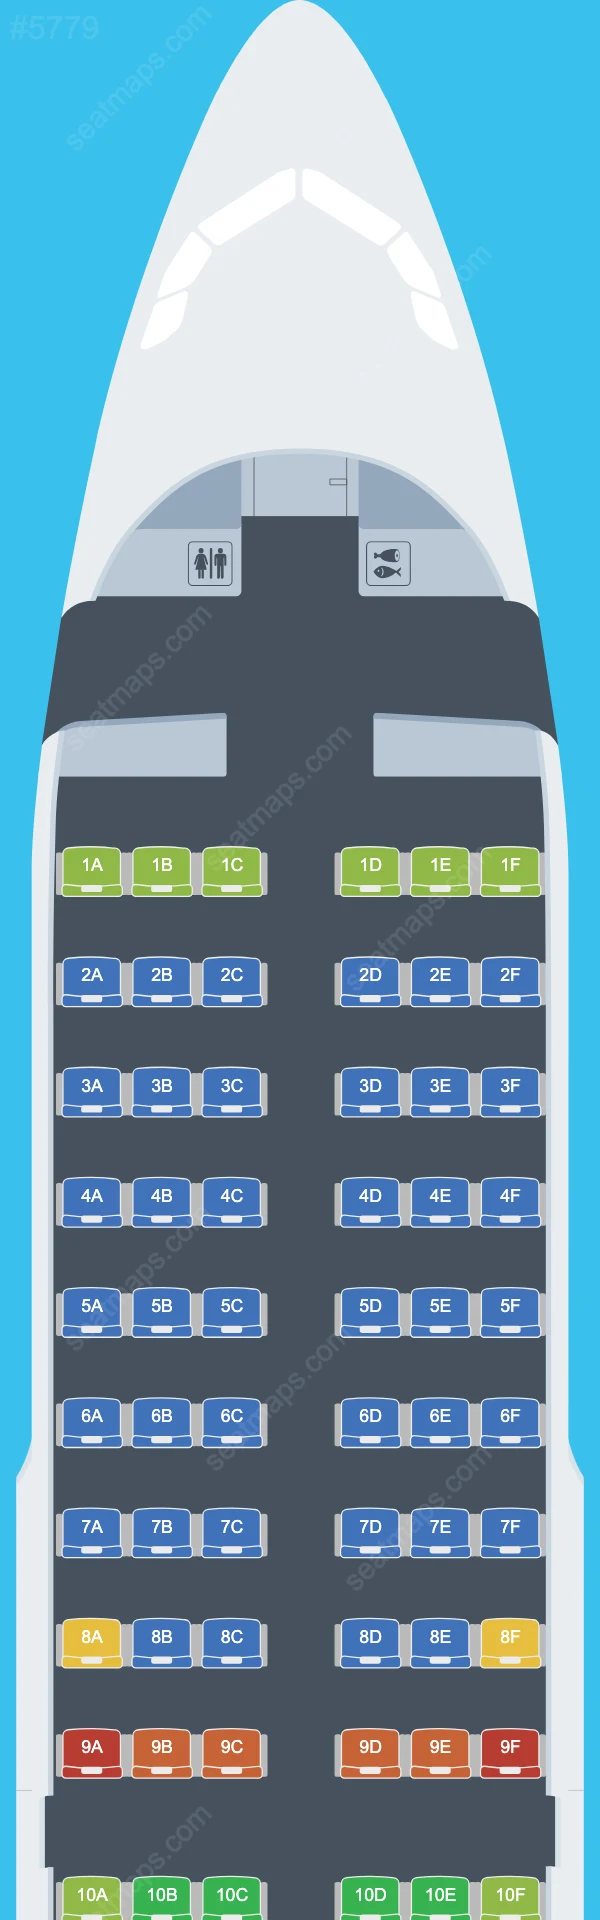 Eurowings Airbus A319 Seat Maps A319-100 V.2